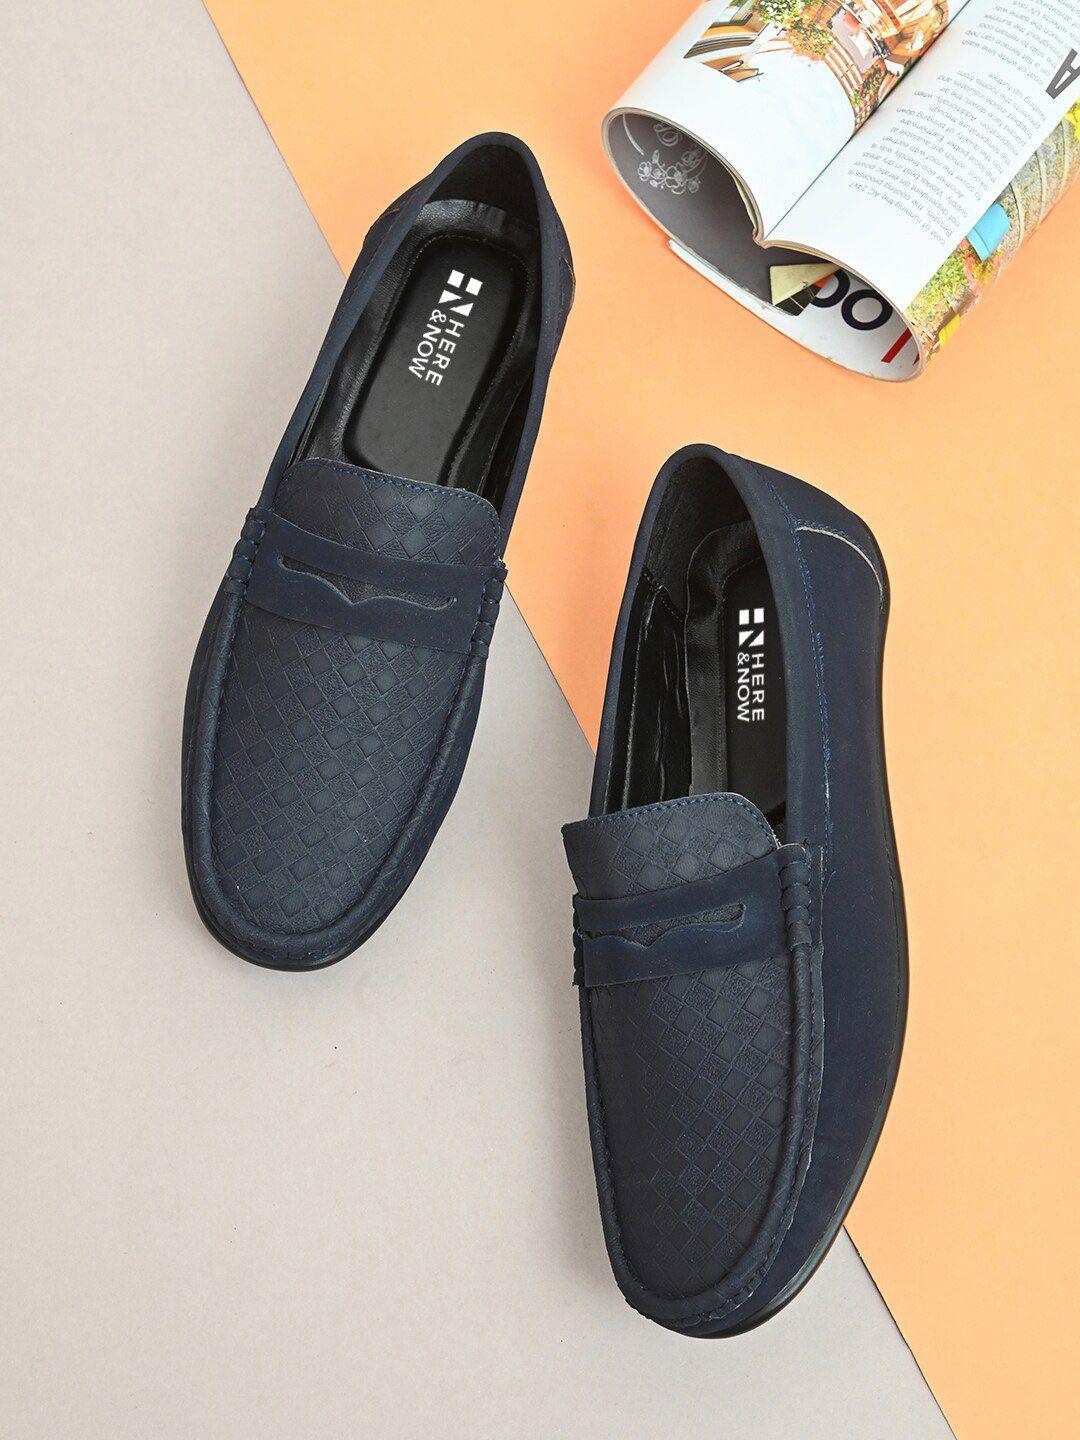 here&now men slip on lightweight loafers